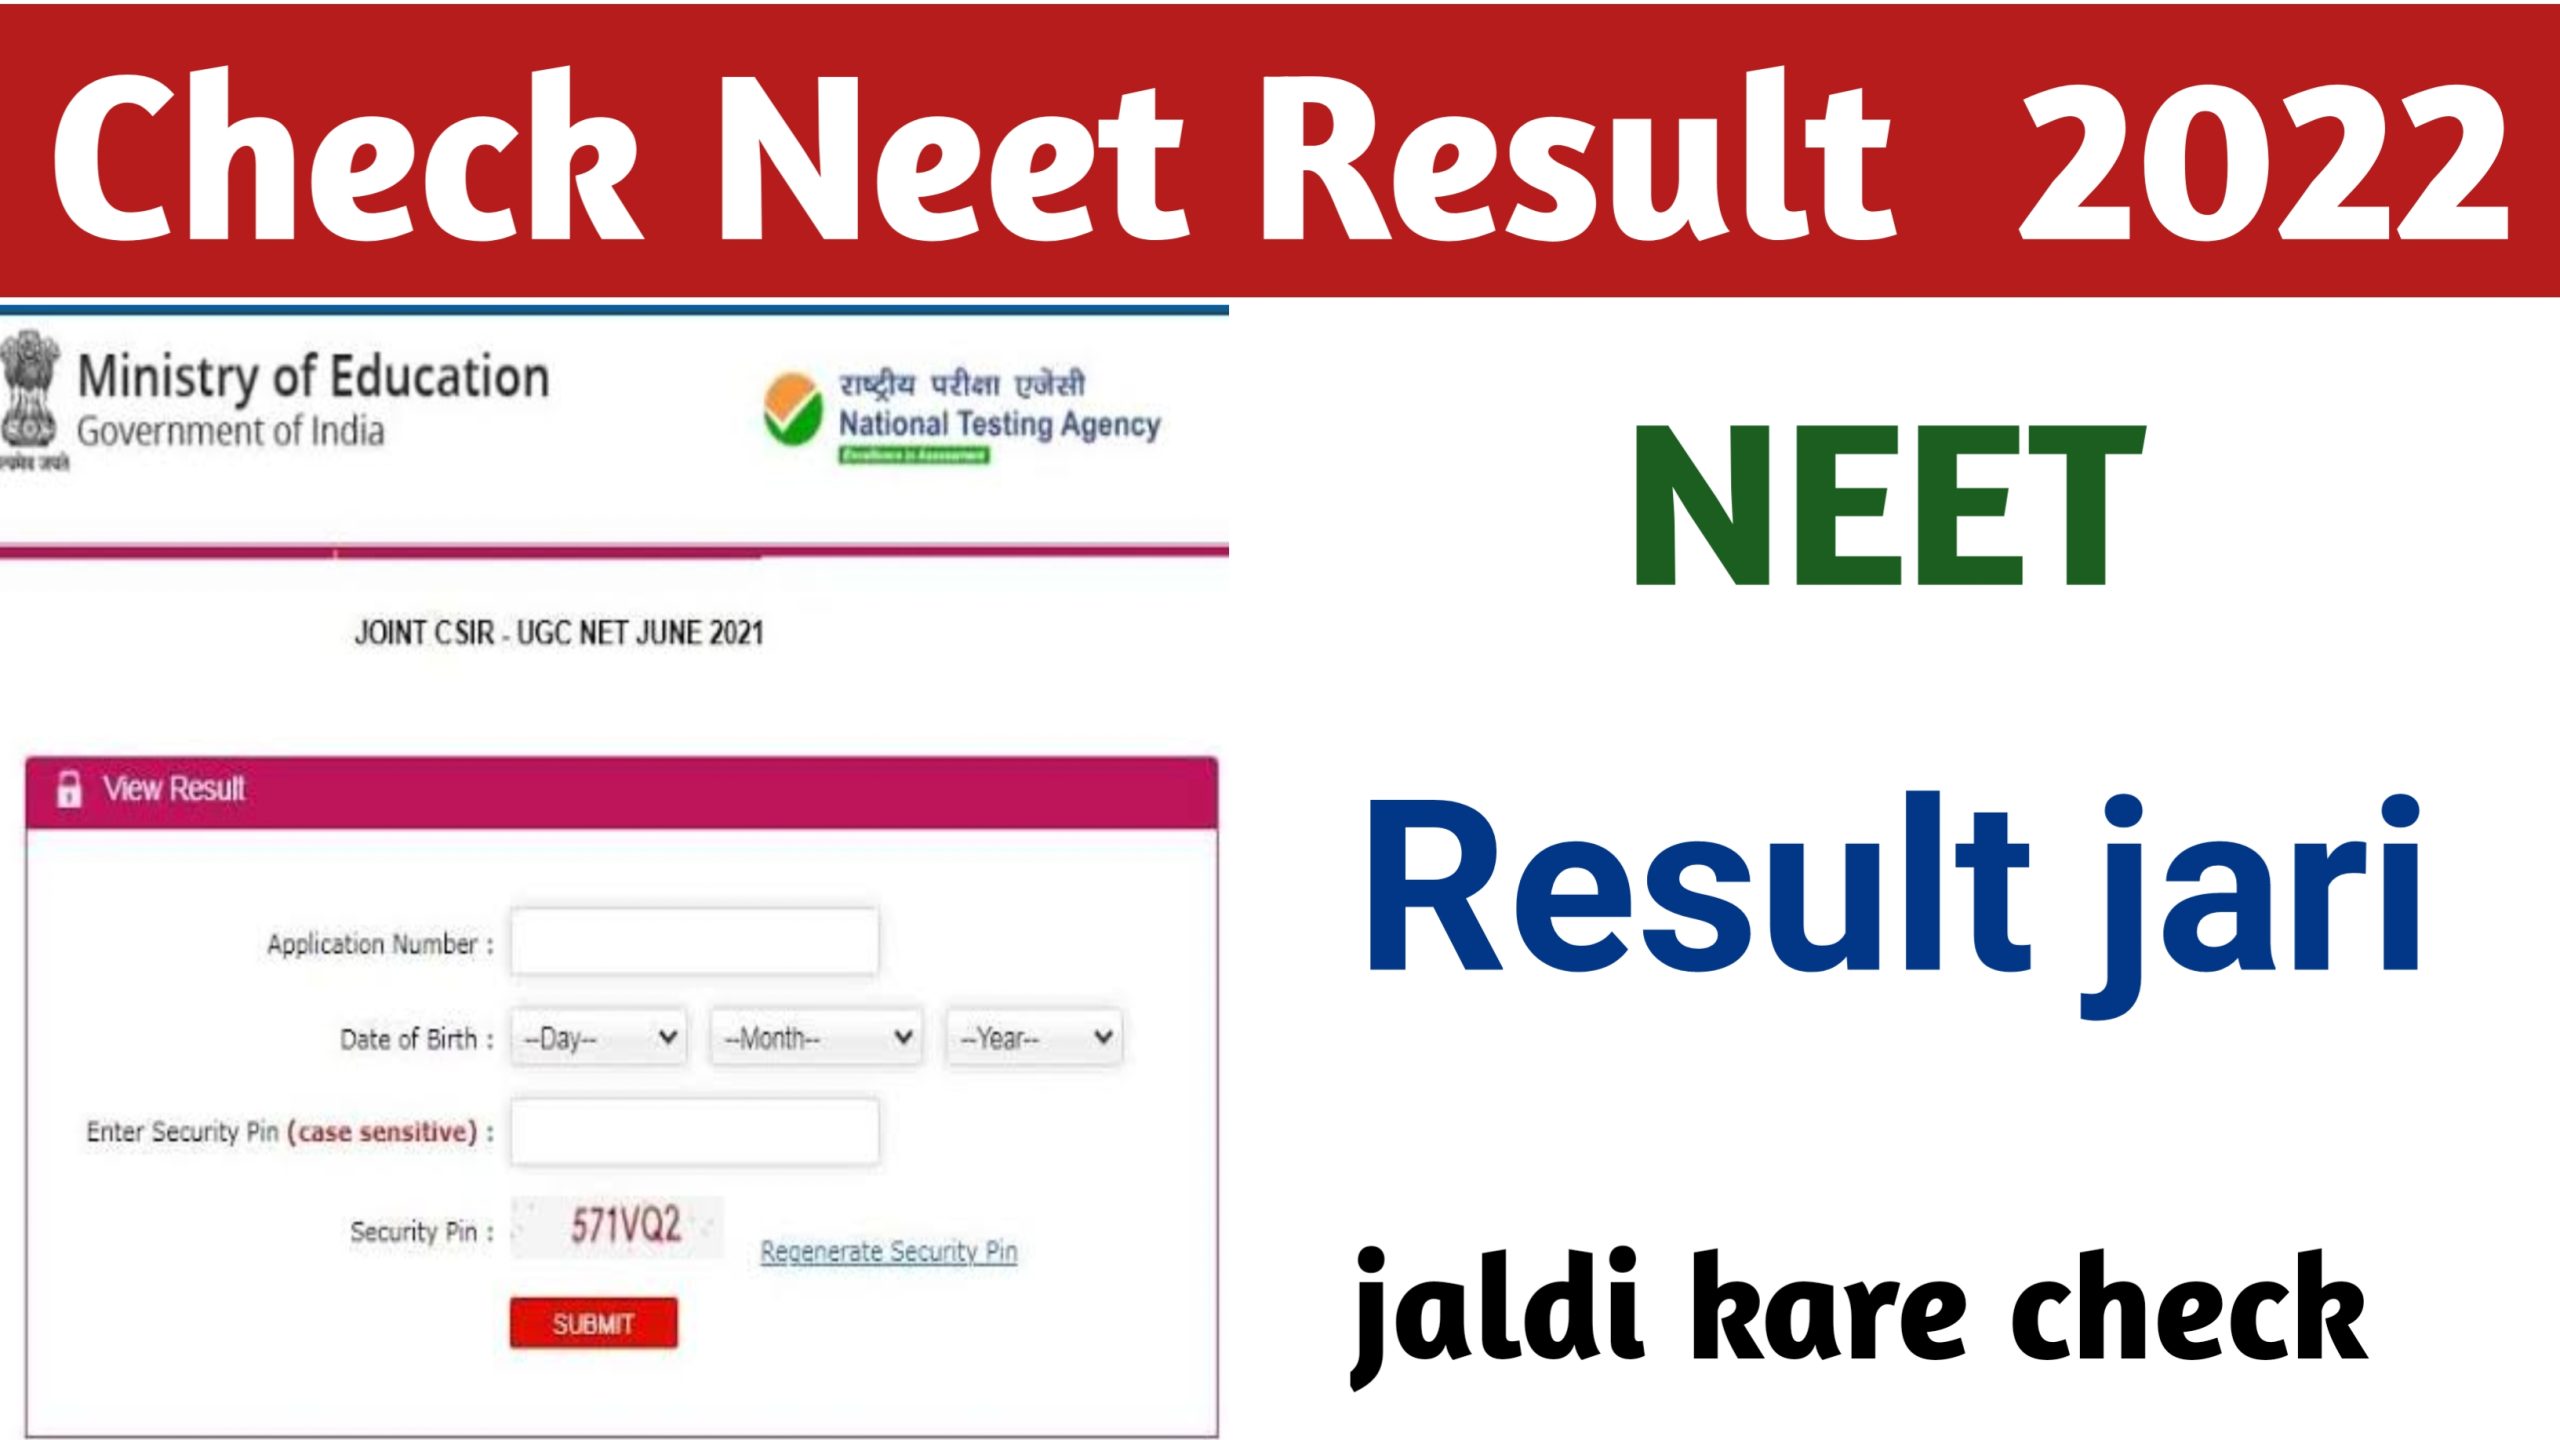 How To Check Neet Result 2022